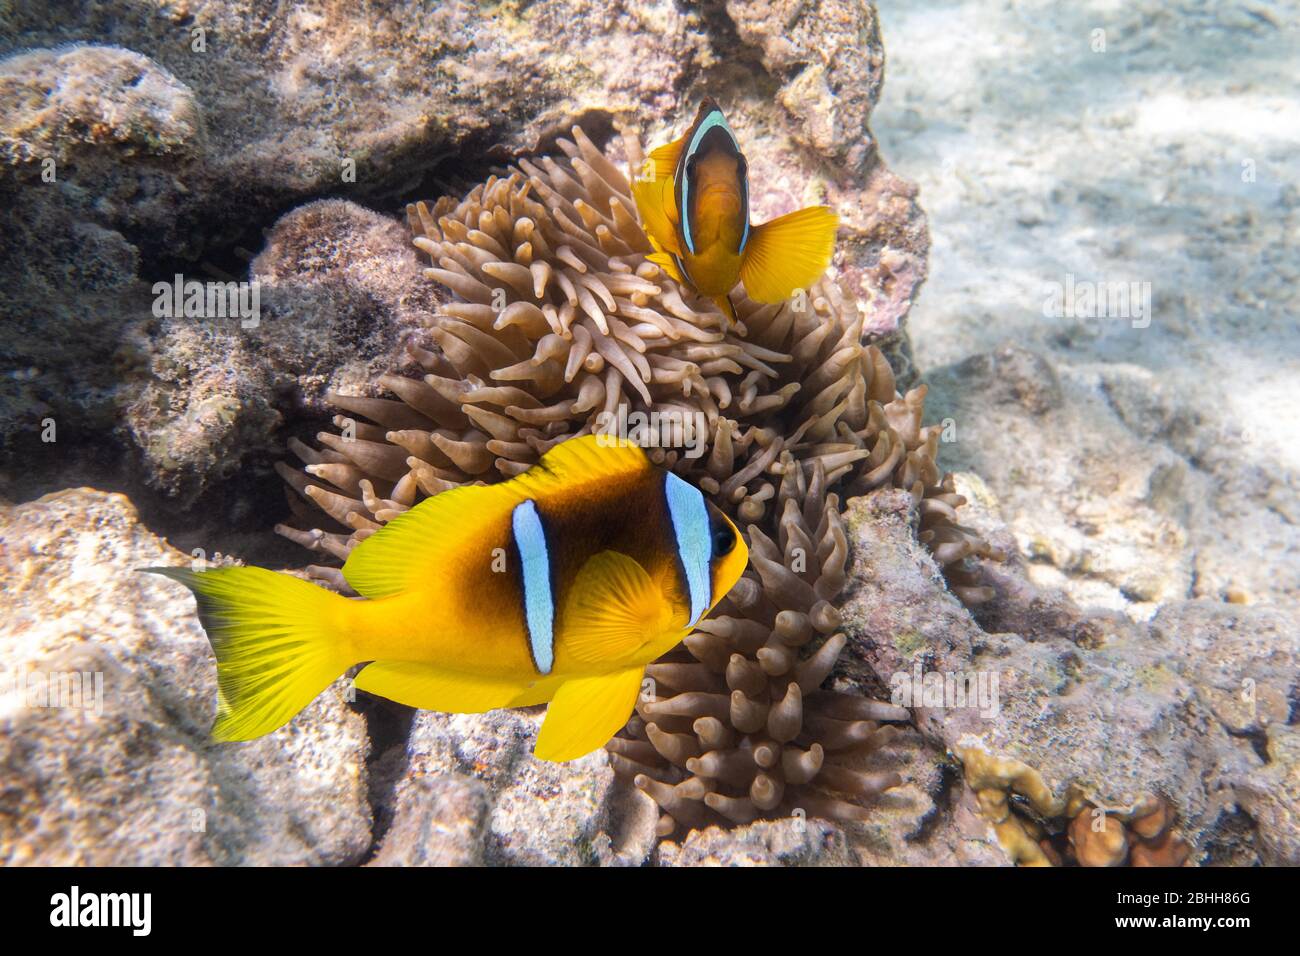 Two Orange Clownfish (Anemone Fish) In Anemone Soft Coral. Pair Of Bright Striped Marine Tropical Fish In Natural Habitat In Red Sea, Egypt. Amazing S Stock Photo